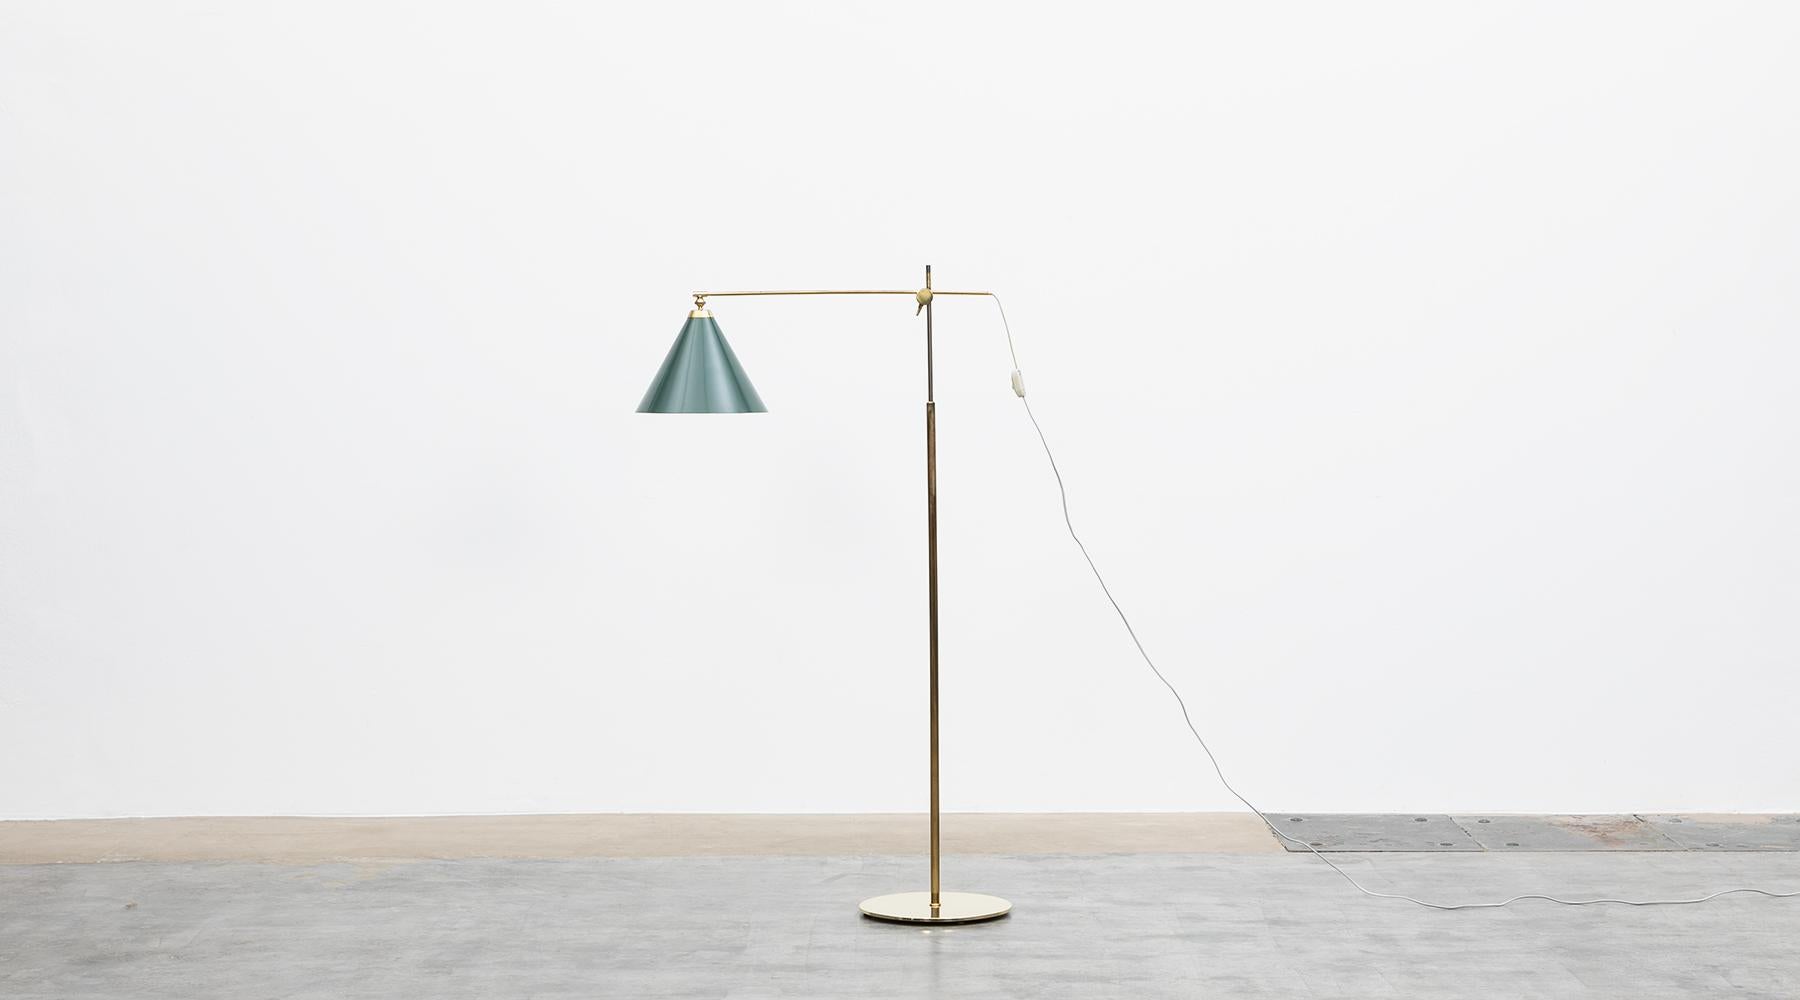 Lacquered green metal shadow, brass stem and base by Kaare Klint, Denmark, 1940.

Very unique floor lamp from the midcentury, designed by Kaare Klint. The lamps are made of brass and are adjustable in height and angle of the shade. Kaare Klint was